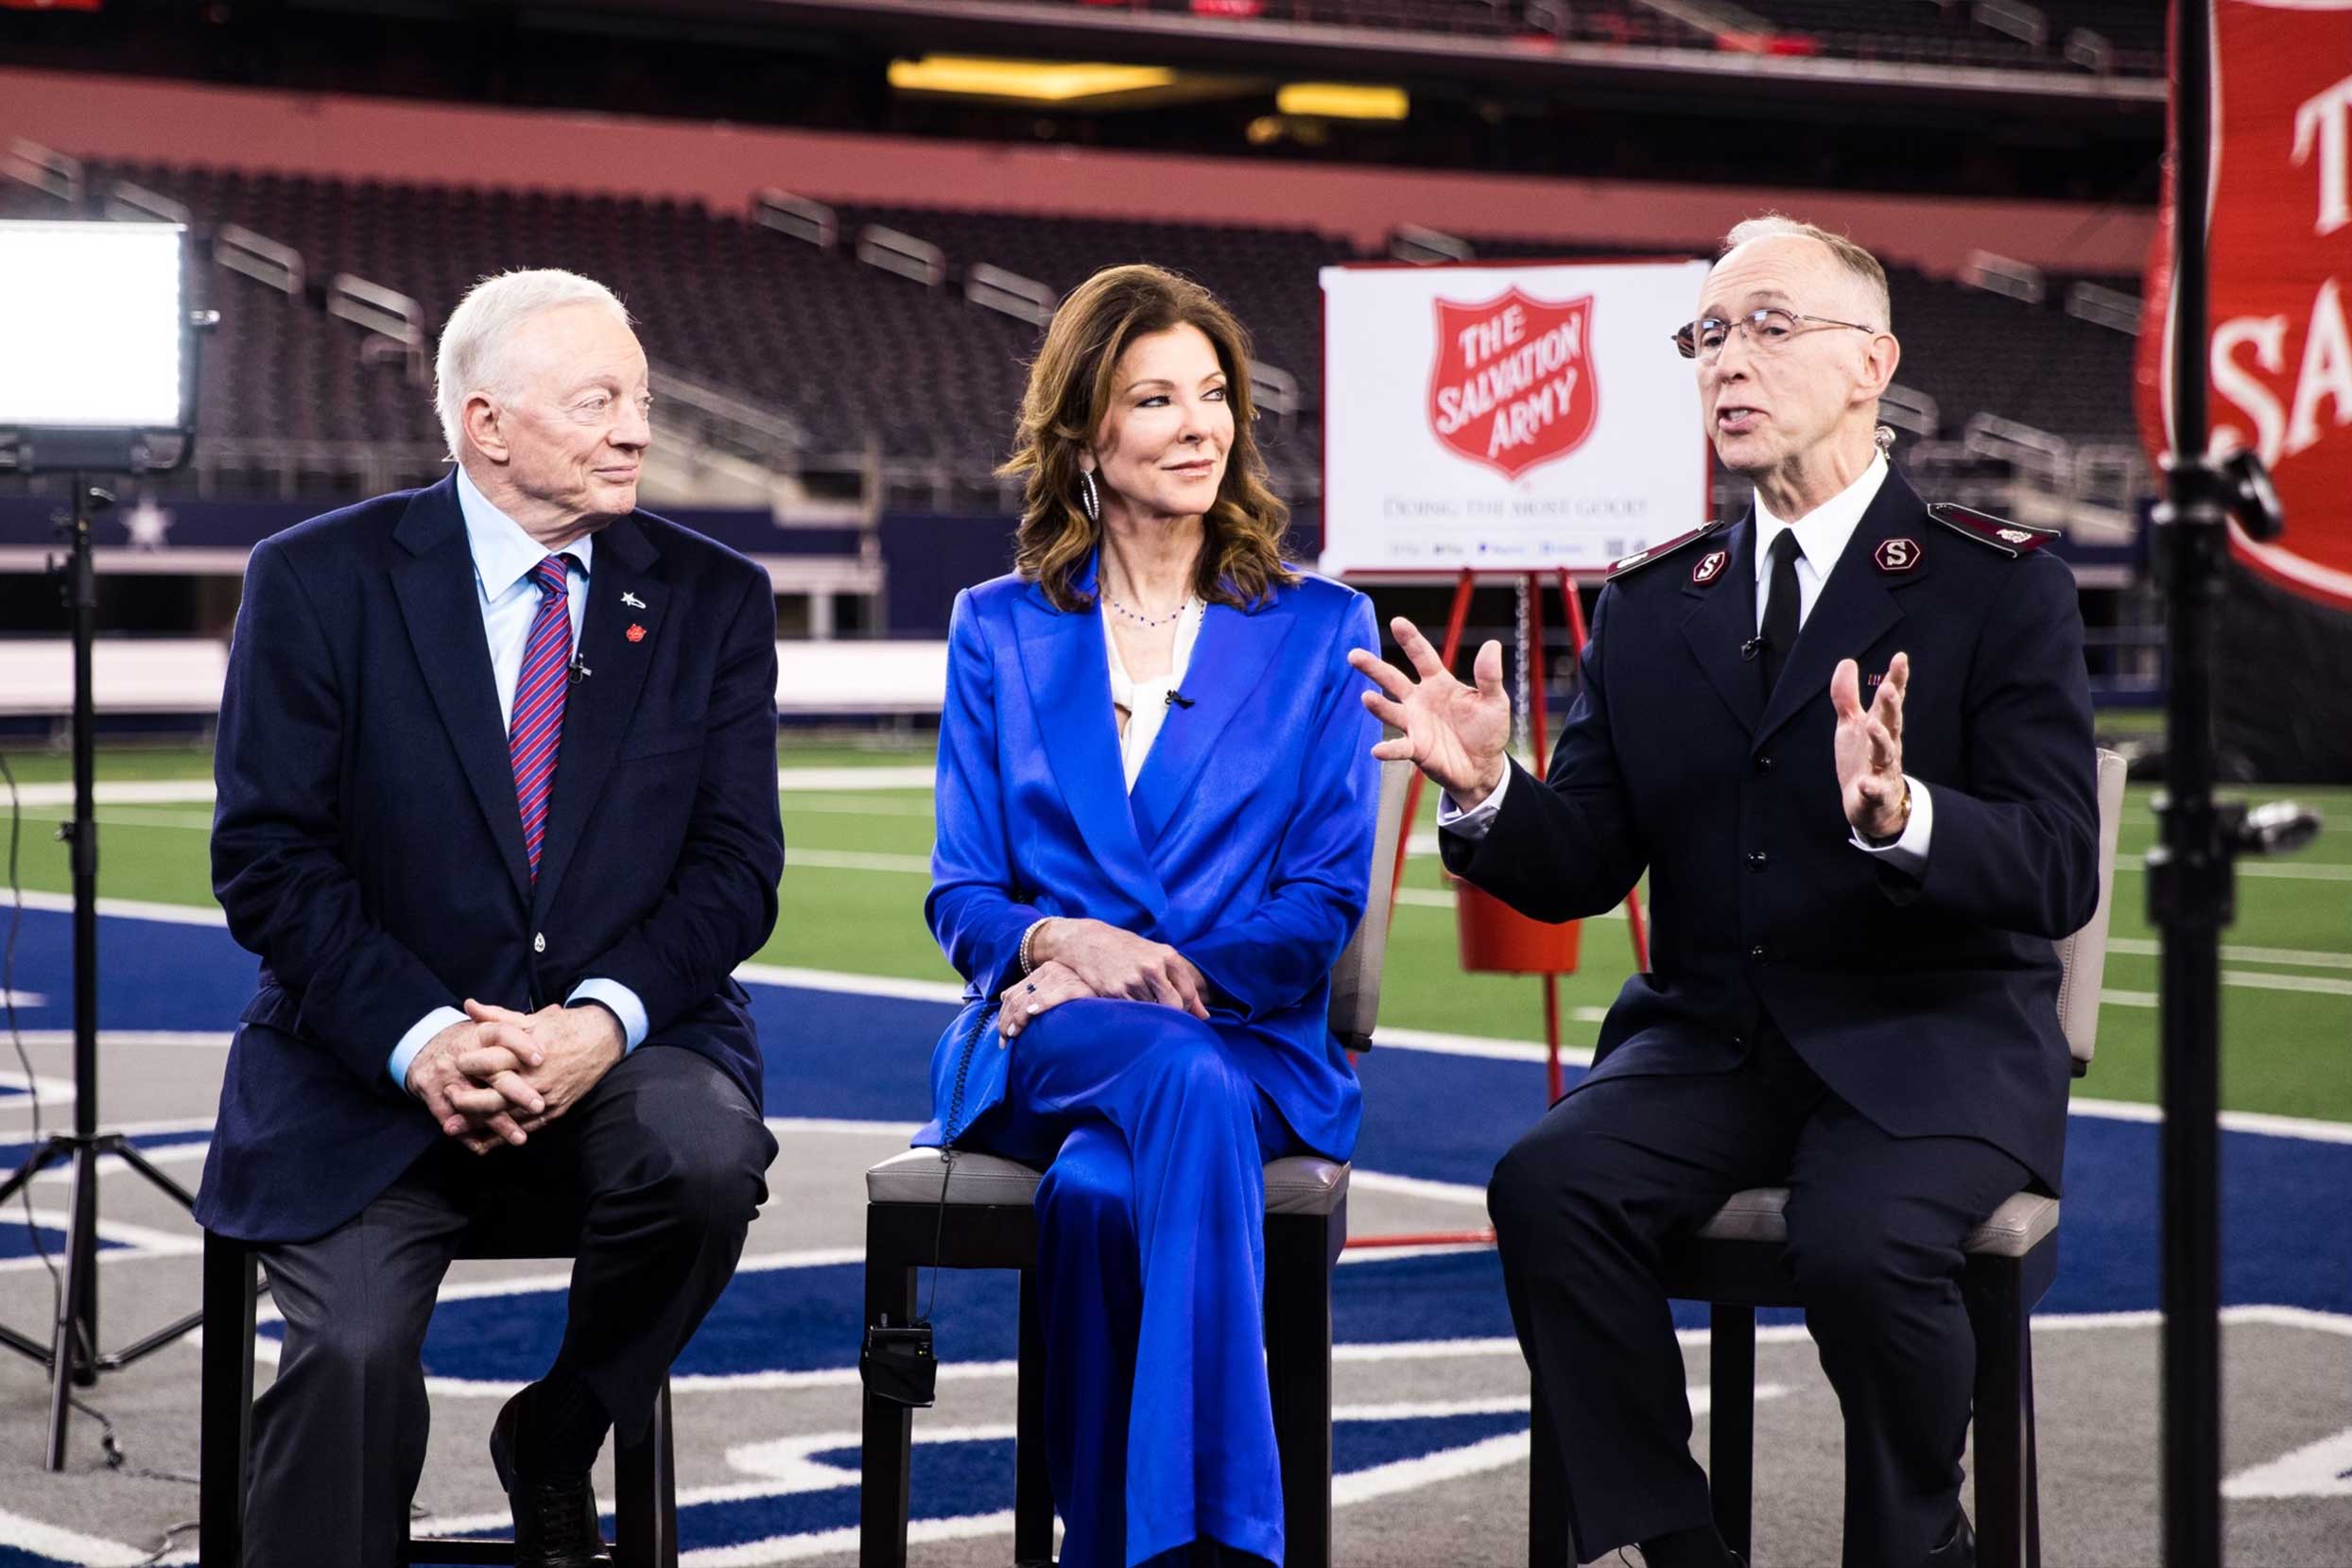 The Salvation Army and The Dallas Cowboys come together to announce the kickoff for the 132nd Red Kettle Campaign.